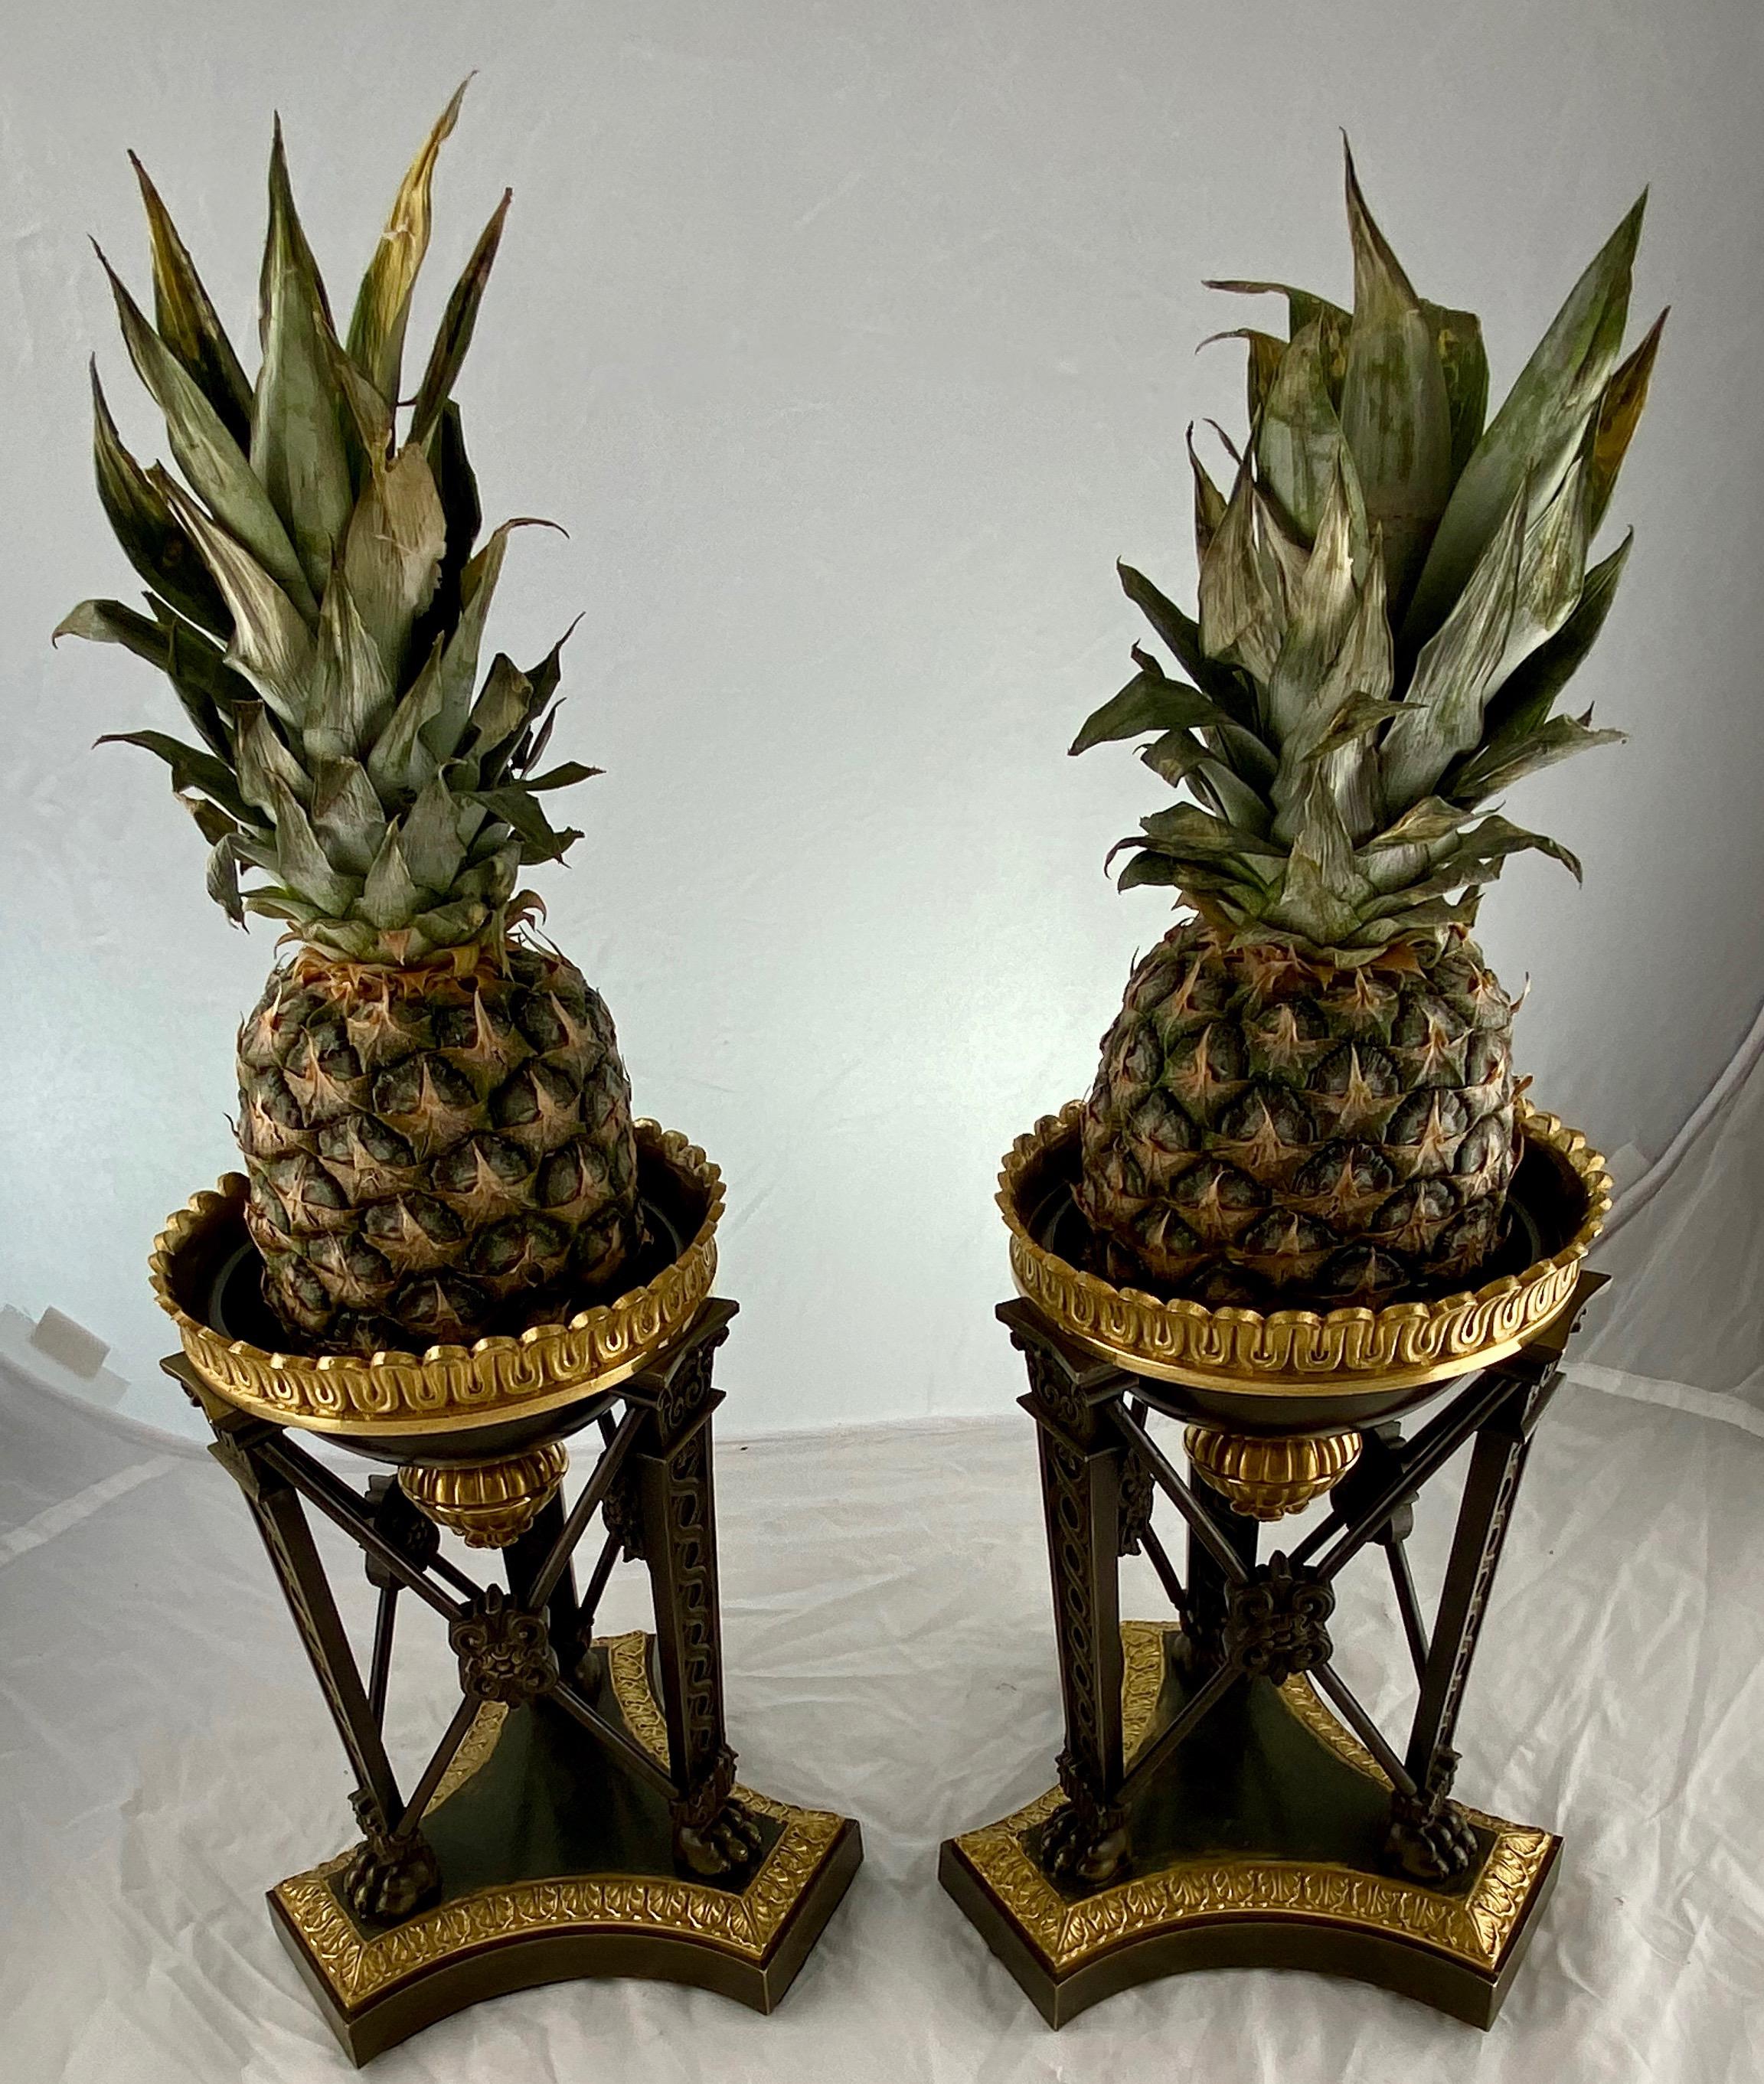 A splendid pair of pineapple holders, they just look great. At a table or in an entrance or anywhere you want people to feel welcome. Dark-patinated and gilt bronze made around 1820. They can also be used without pineapples and then have more of a